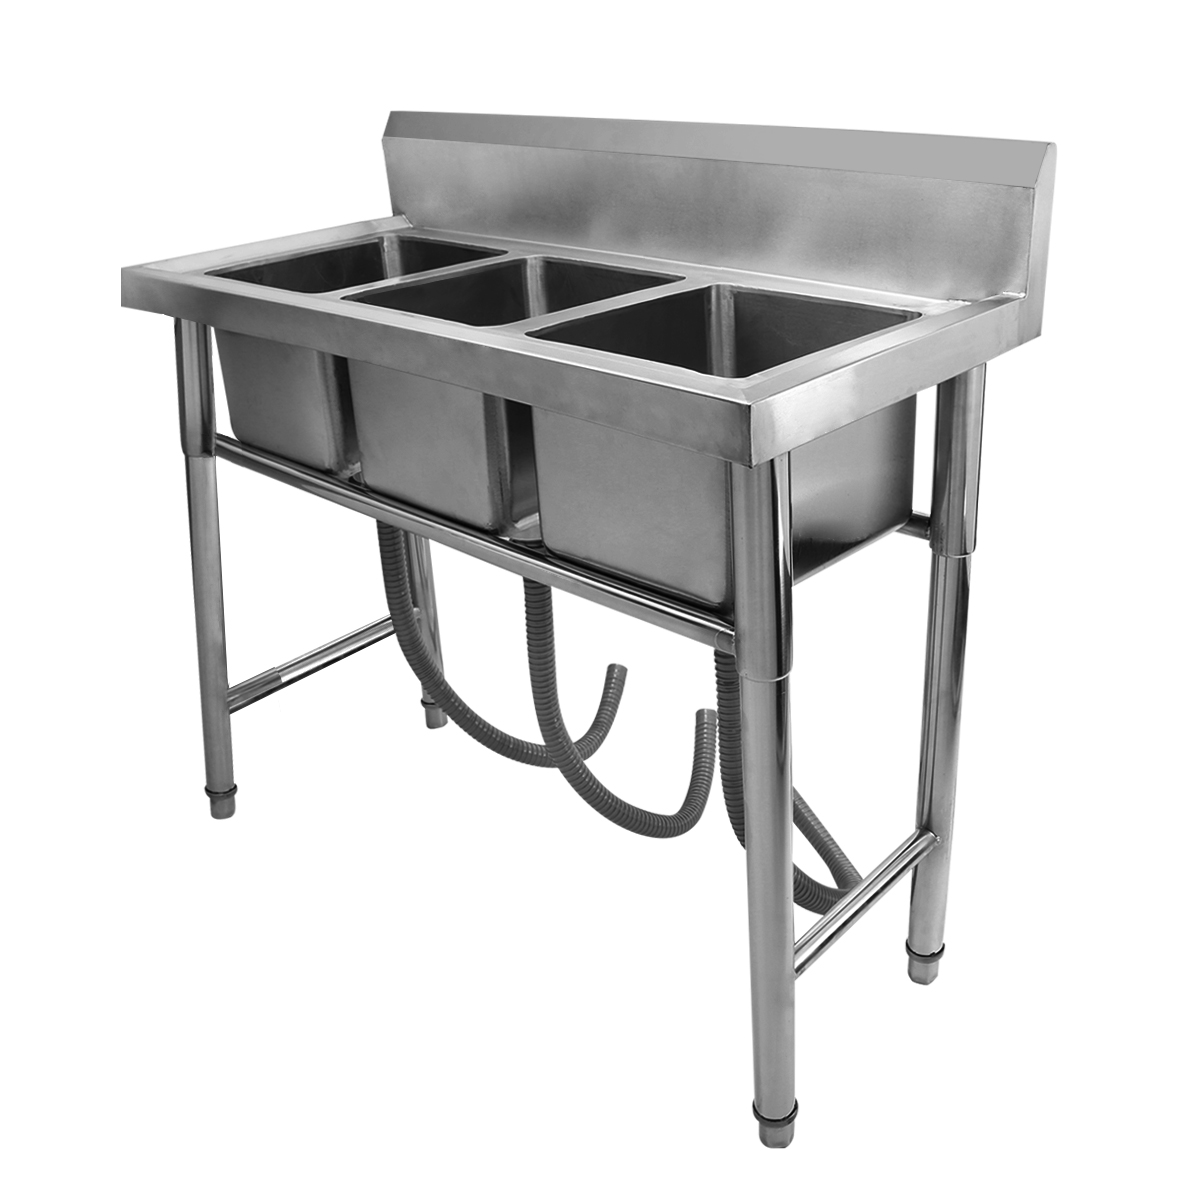 Details About 3 Compartment Stainless Steel Kitchen Commercial Sink Heavy Duty W Drain Pipe